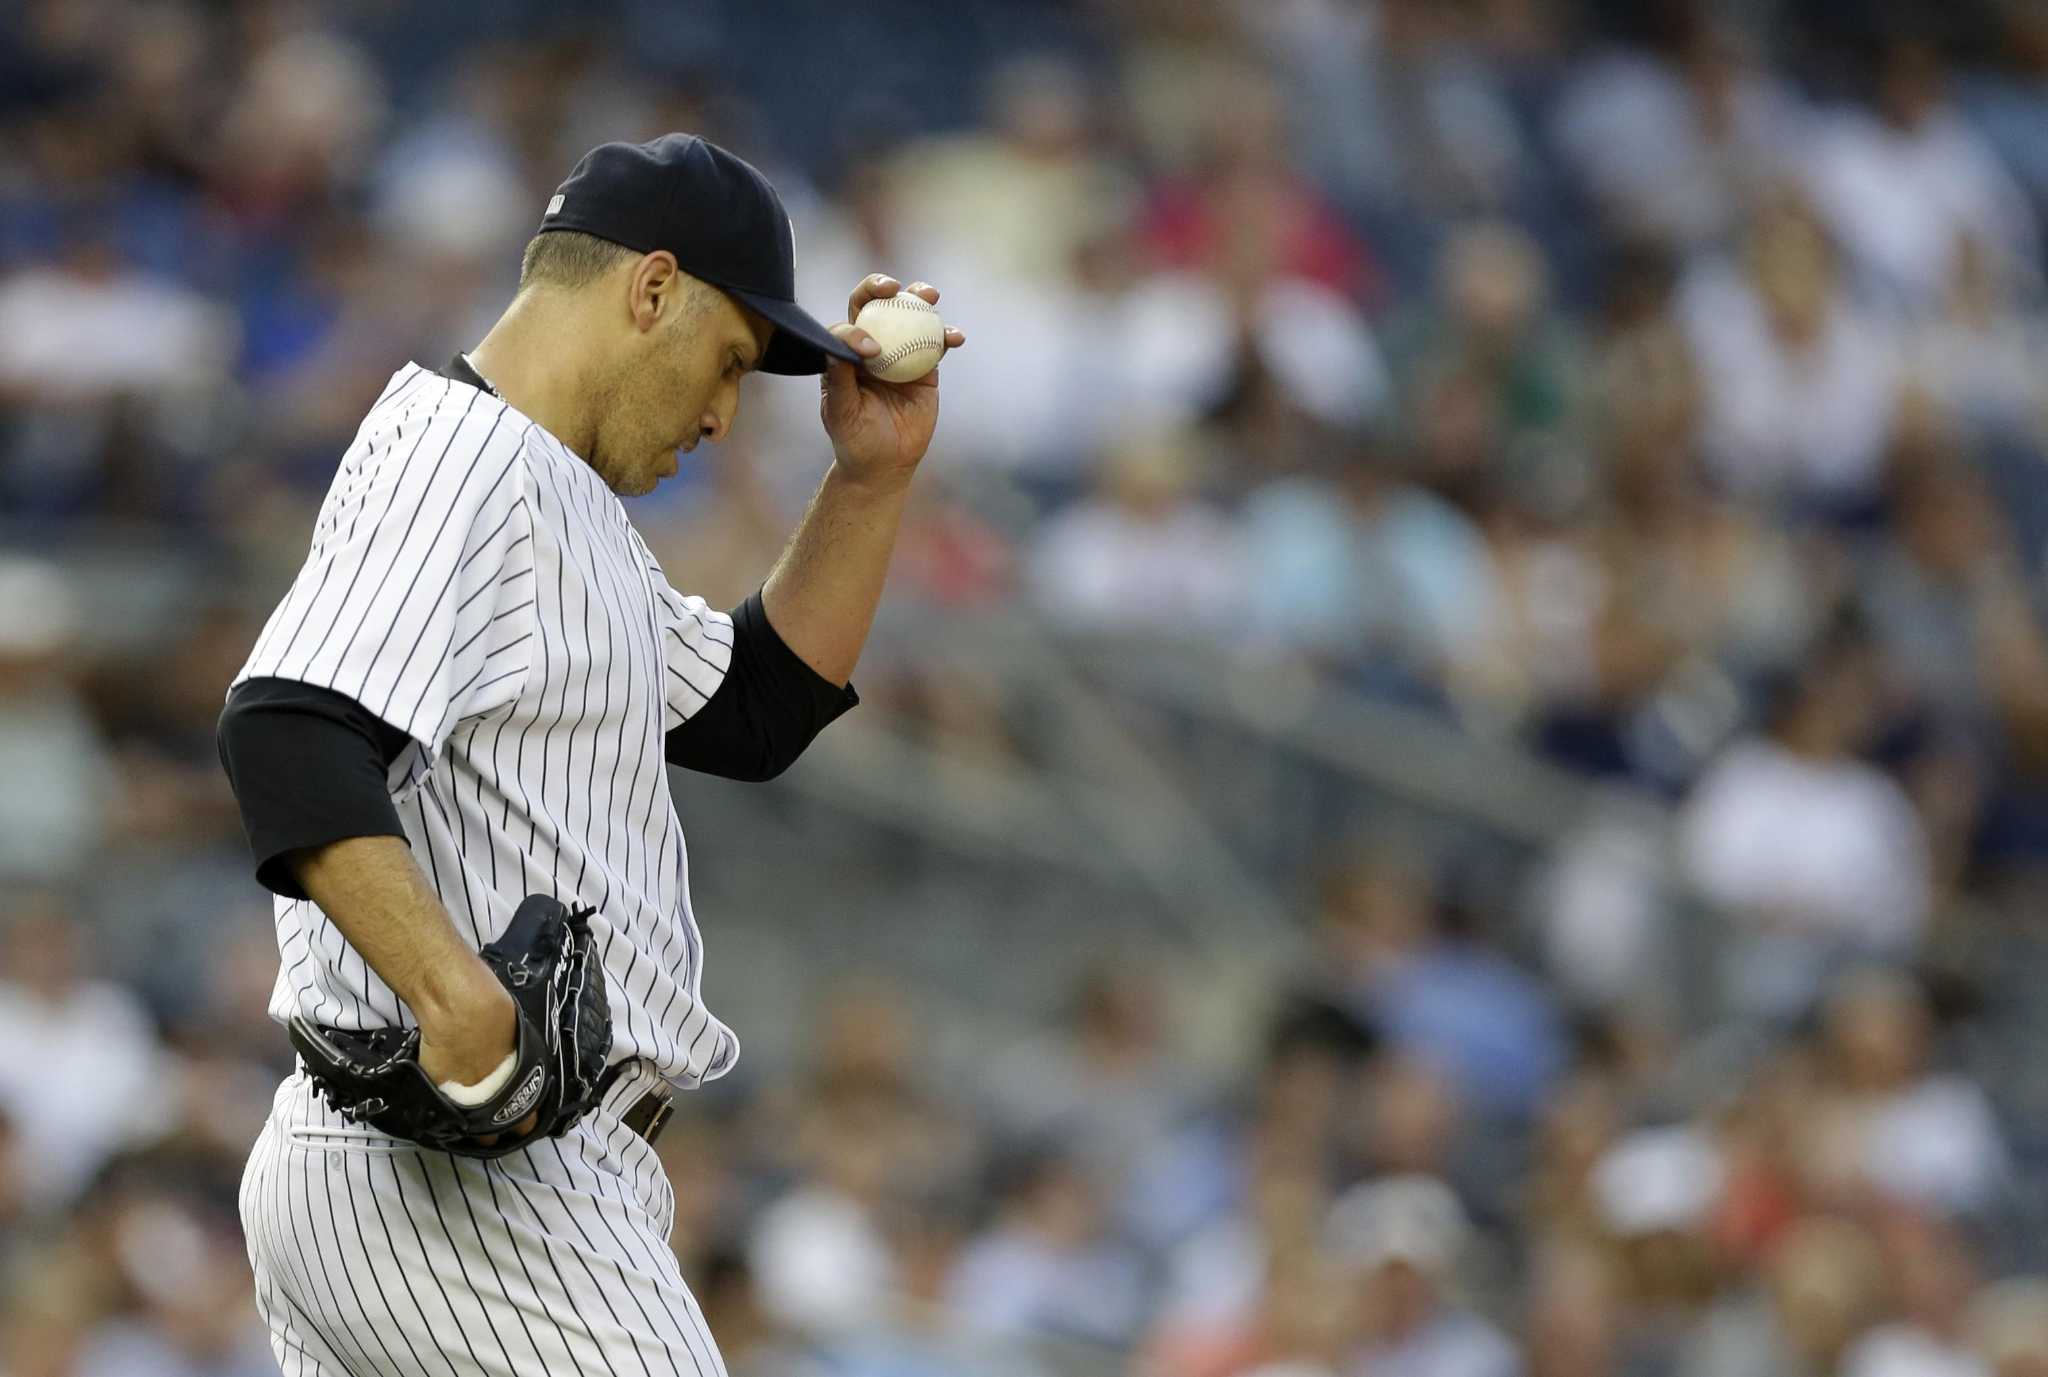 Andy Pettitte earns the 250th win of his career with 7 1/3 innings